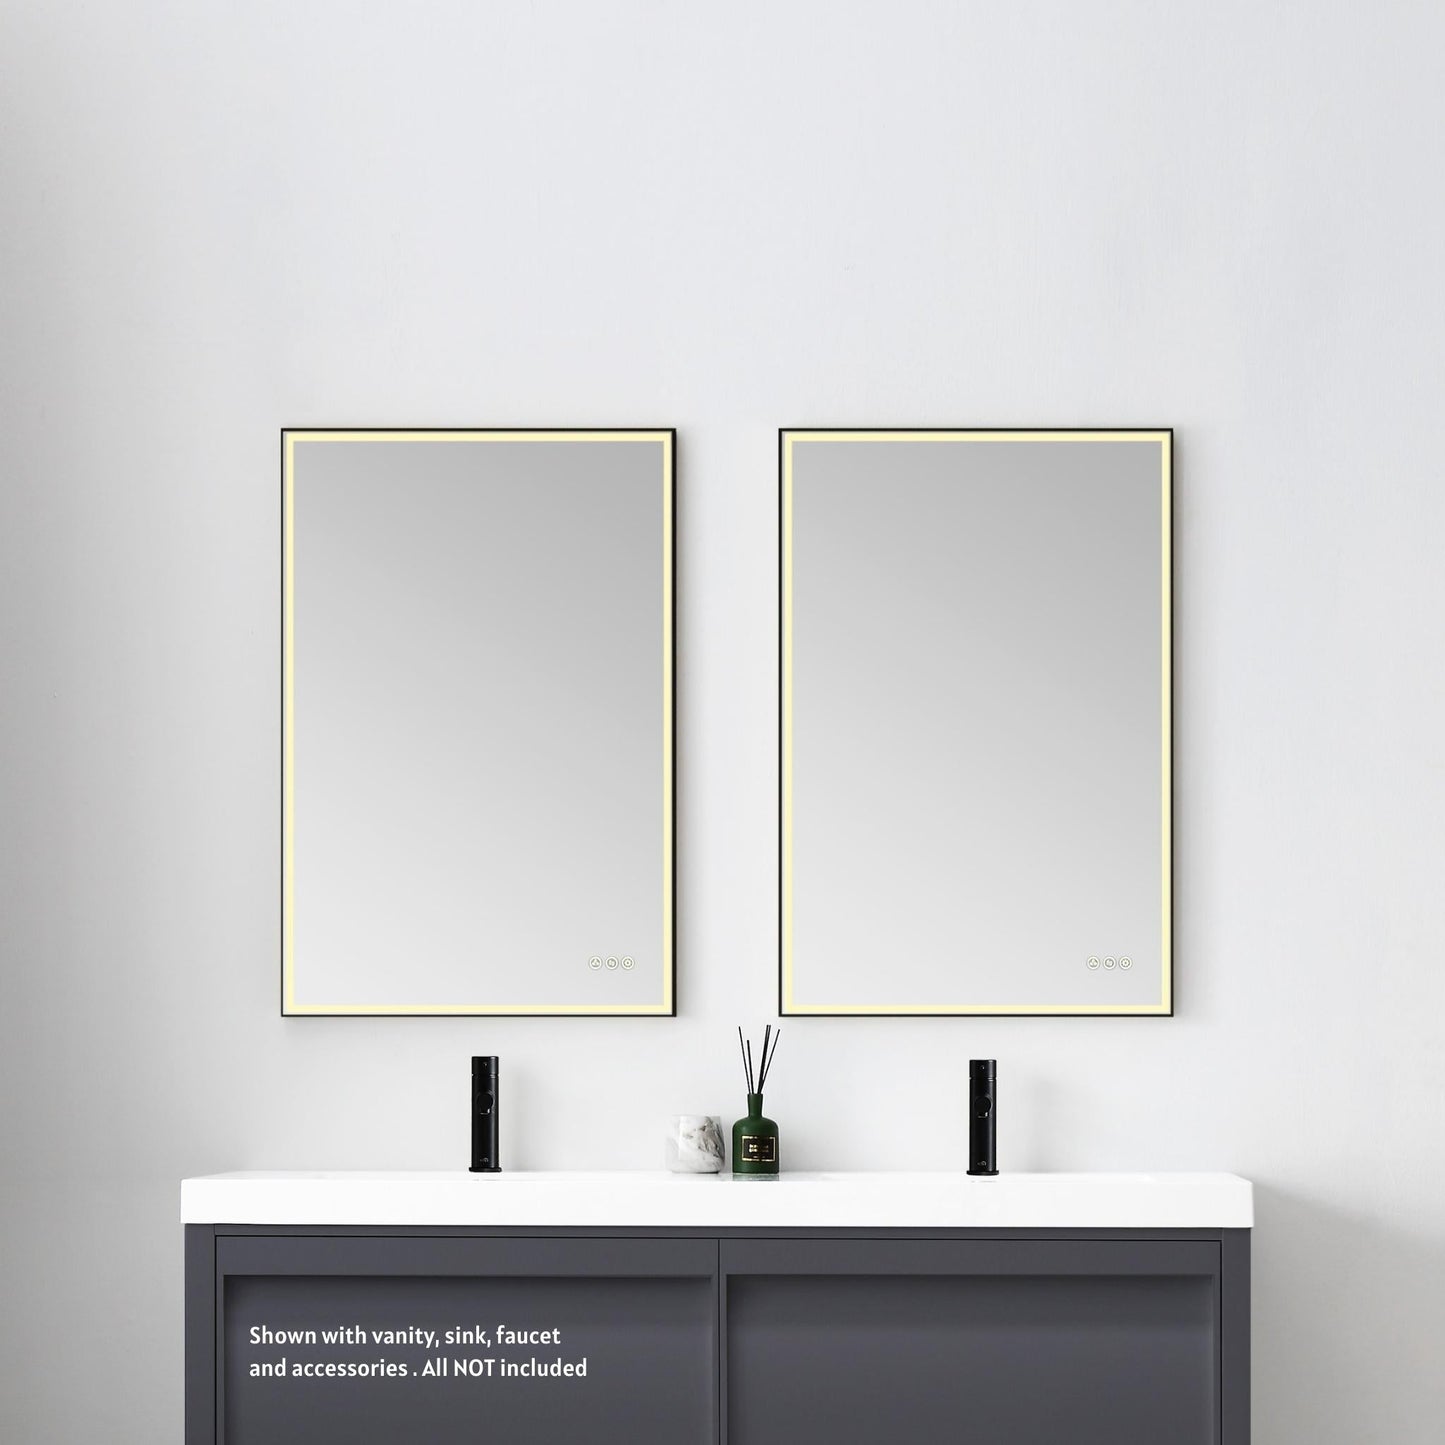 Blossom Stellar 24" x 36" Matte Black Hardwired Wall-Mounted Rectangle LED Mirror